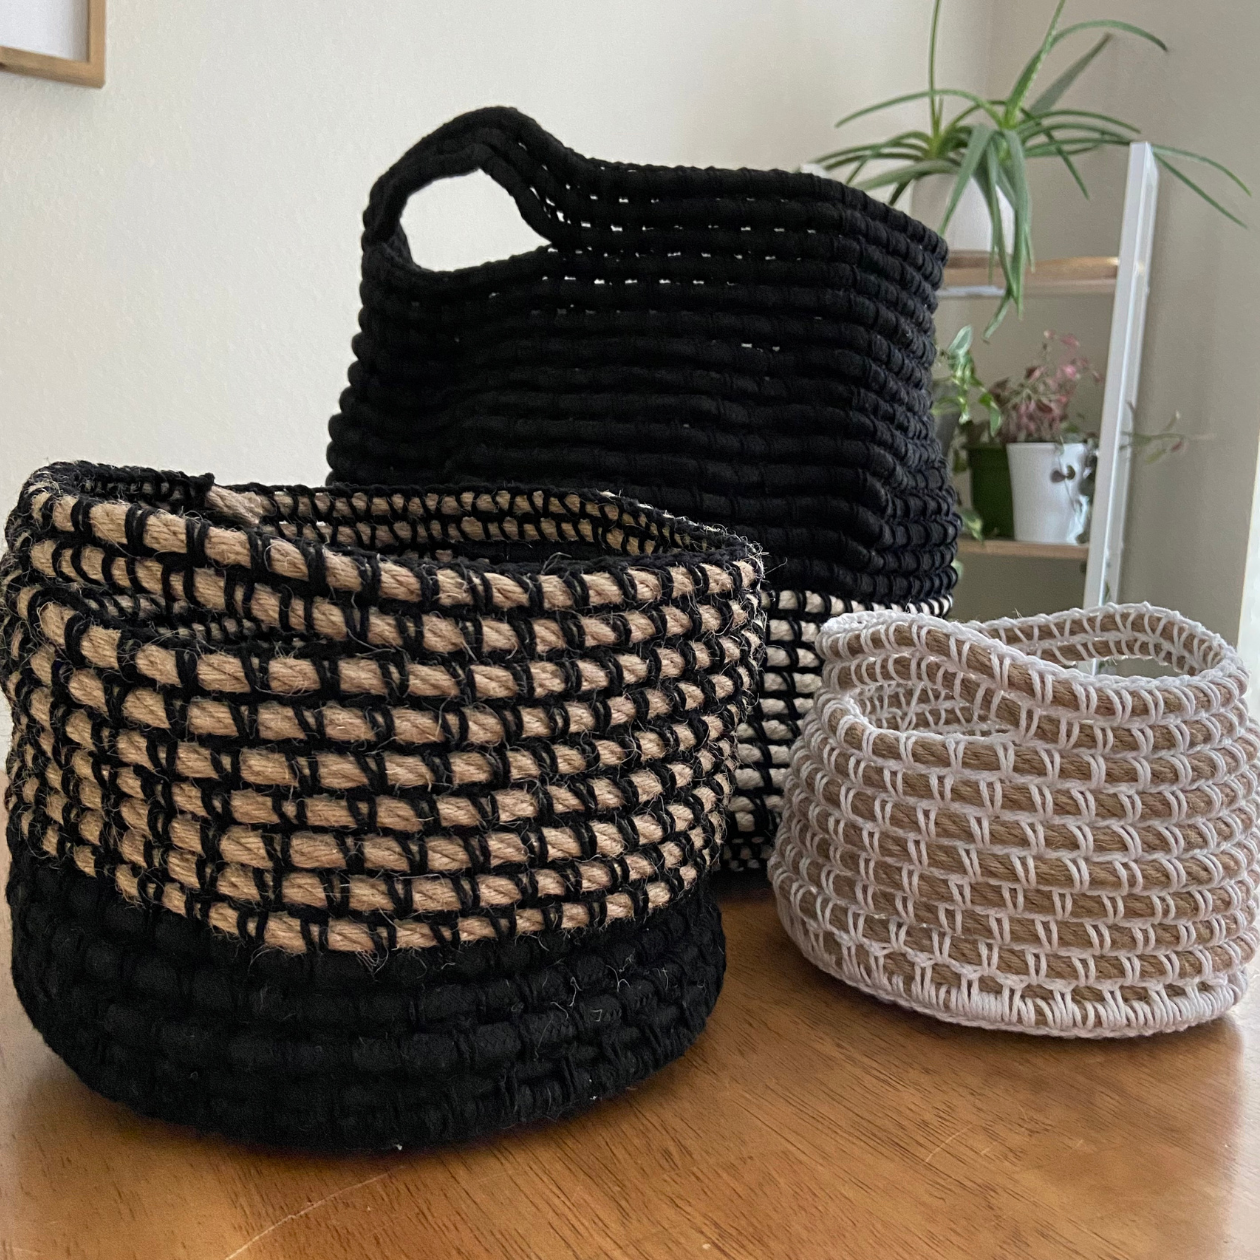 set of 3 black and white crochet rope baskets in ascending sizes